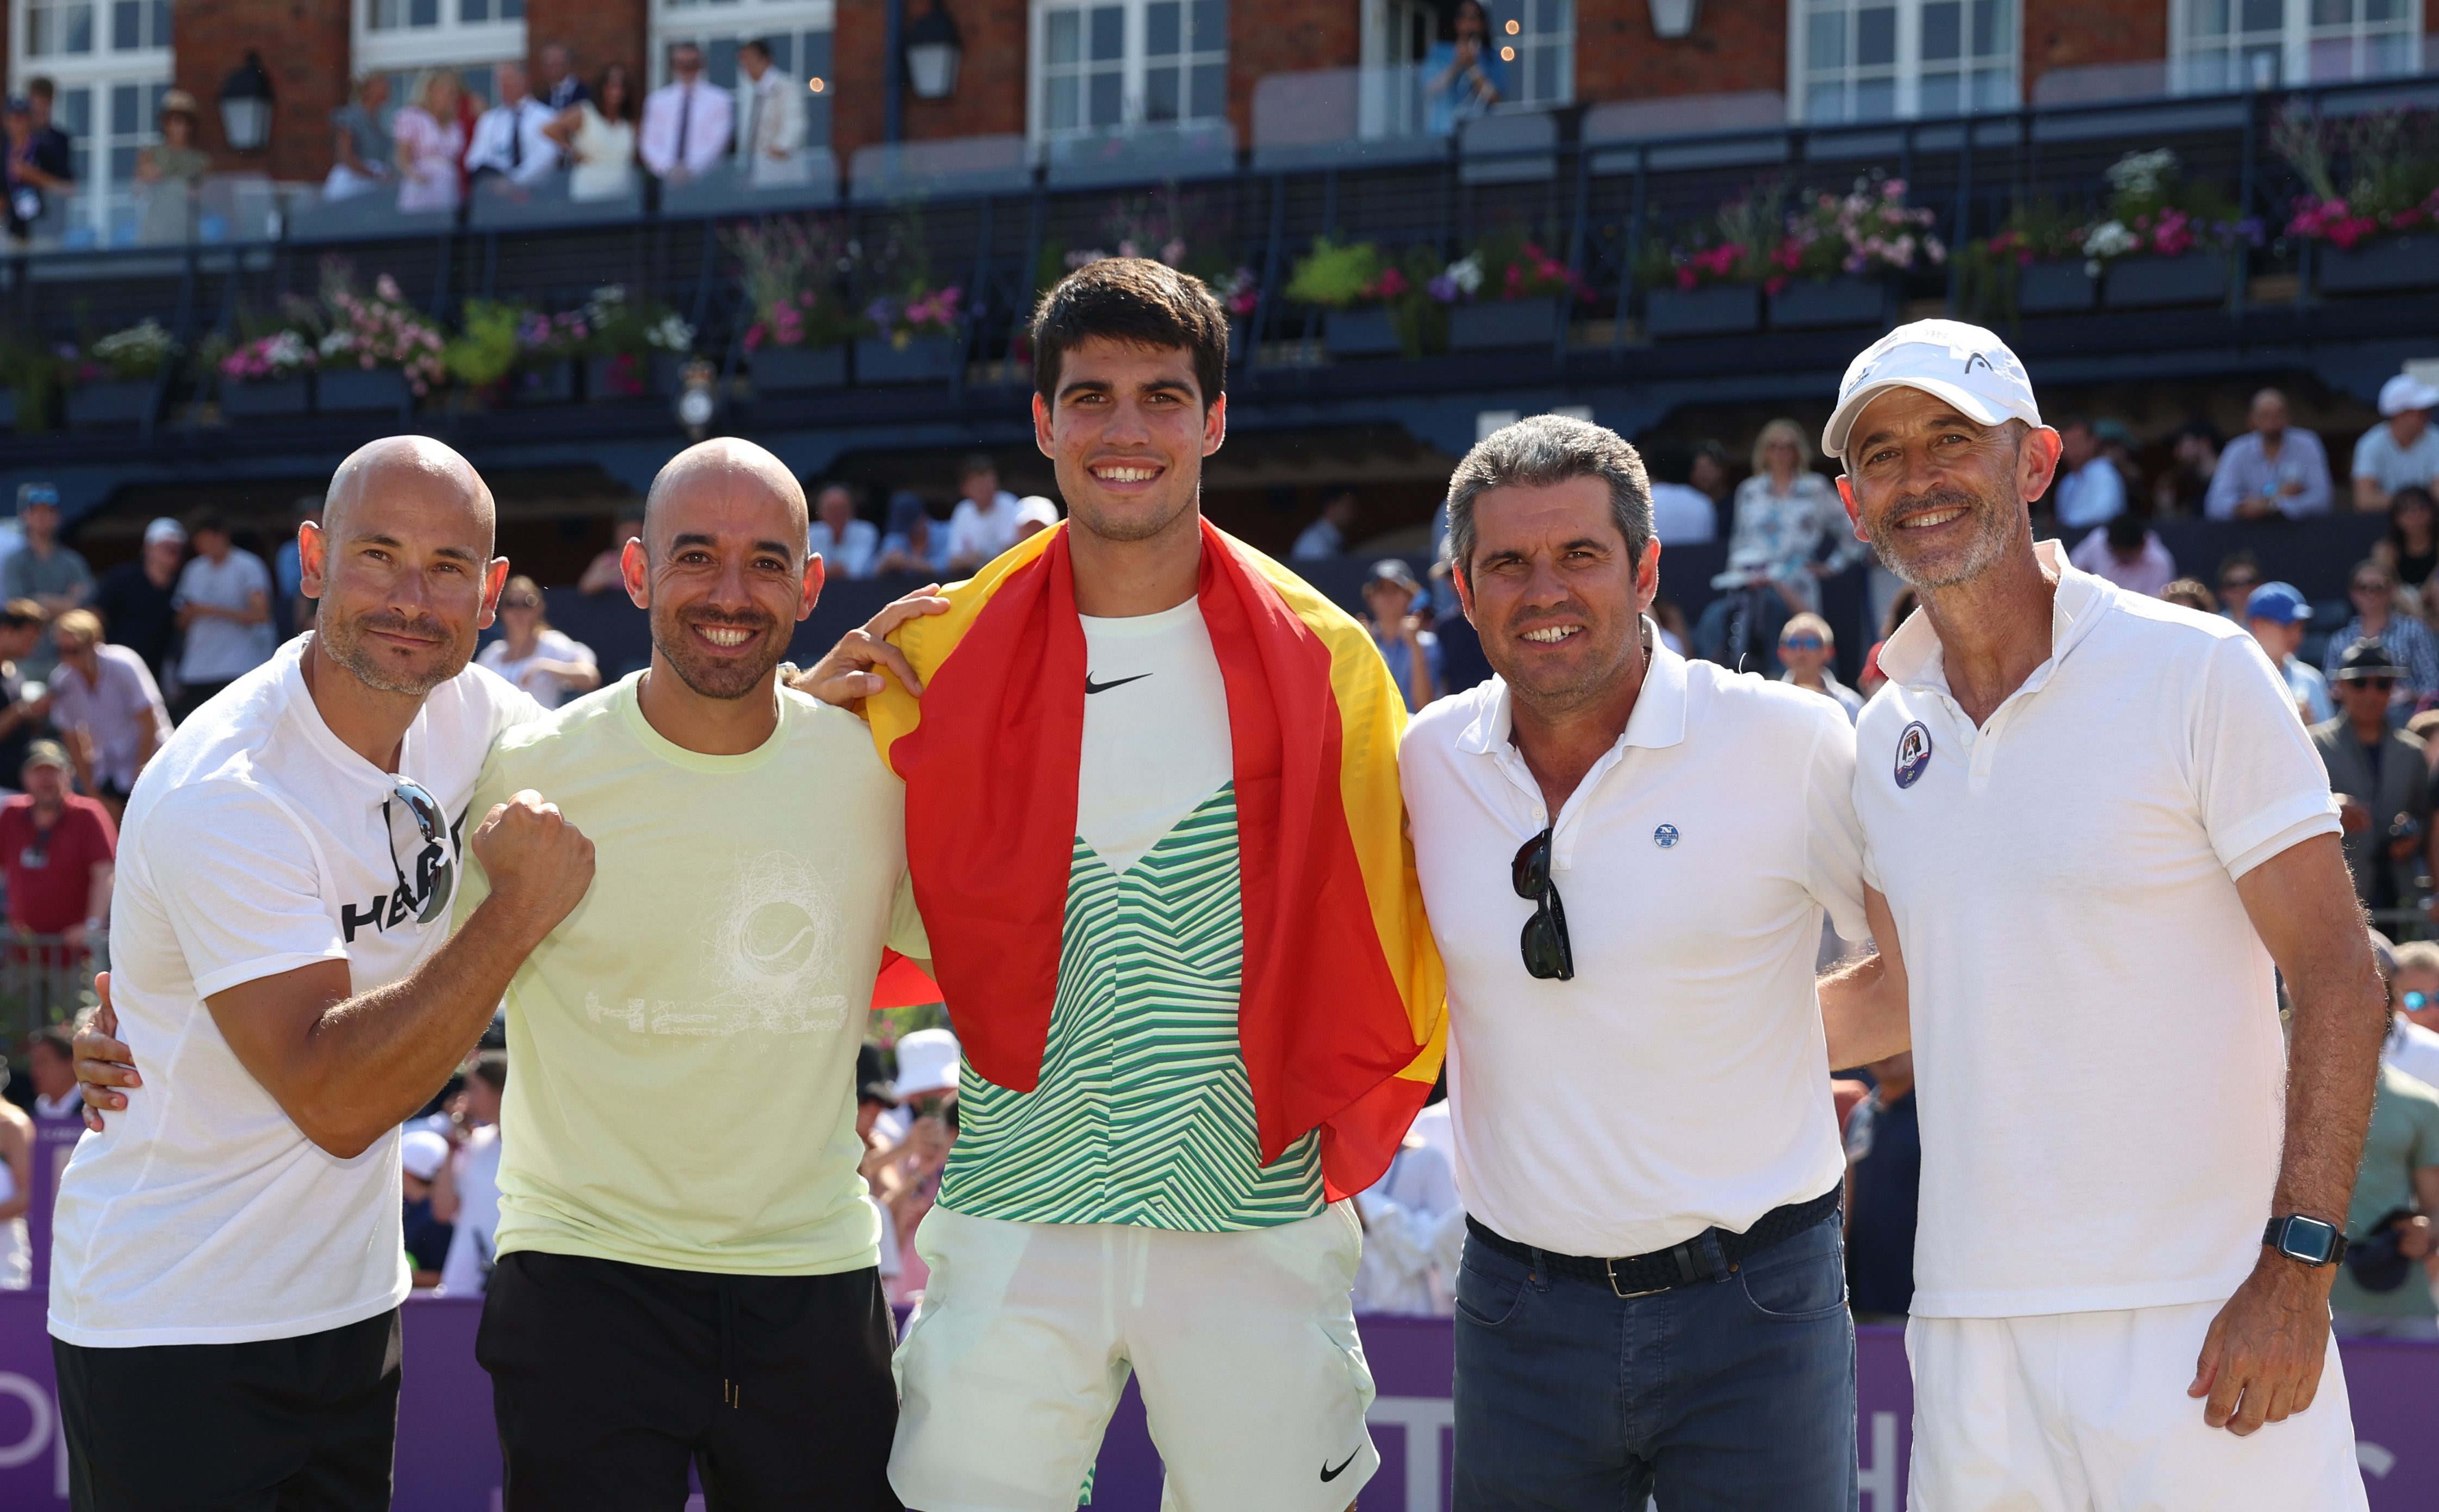 Carlos Alcaraz celebrates winning the Queen's Club championship with his coaching team